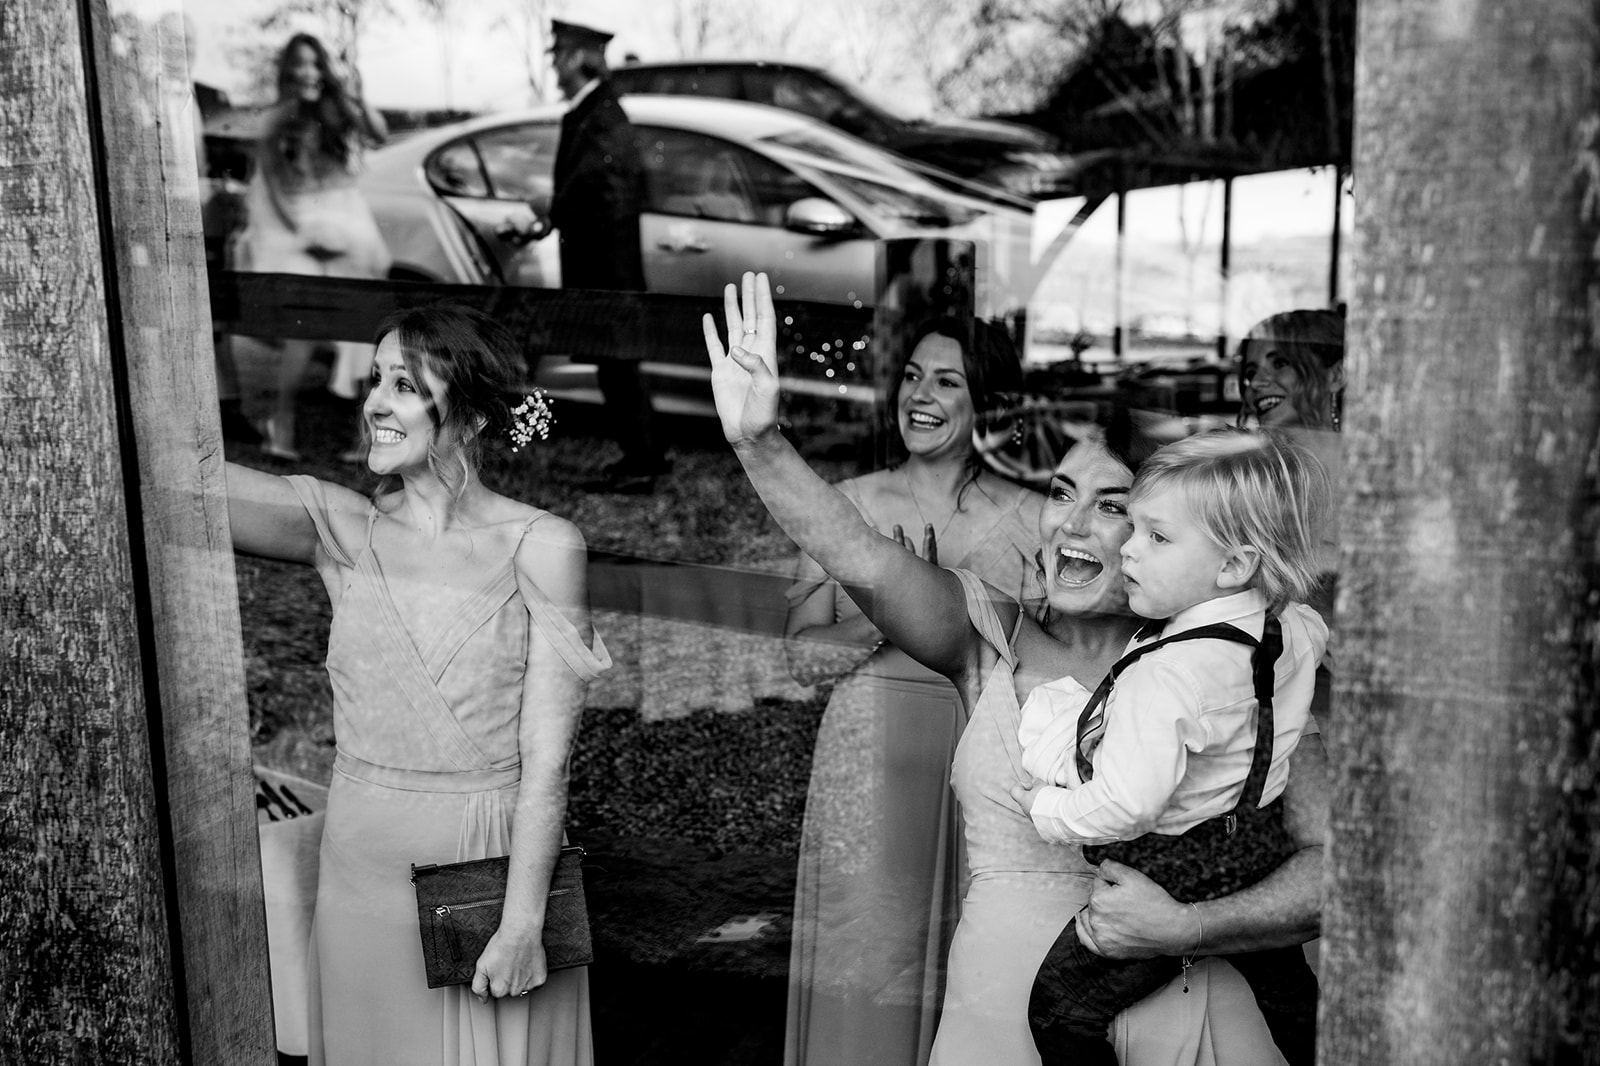 Candid black and white photograph of bridesmaids and a child waving to the bride, captured in the venue window's 